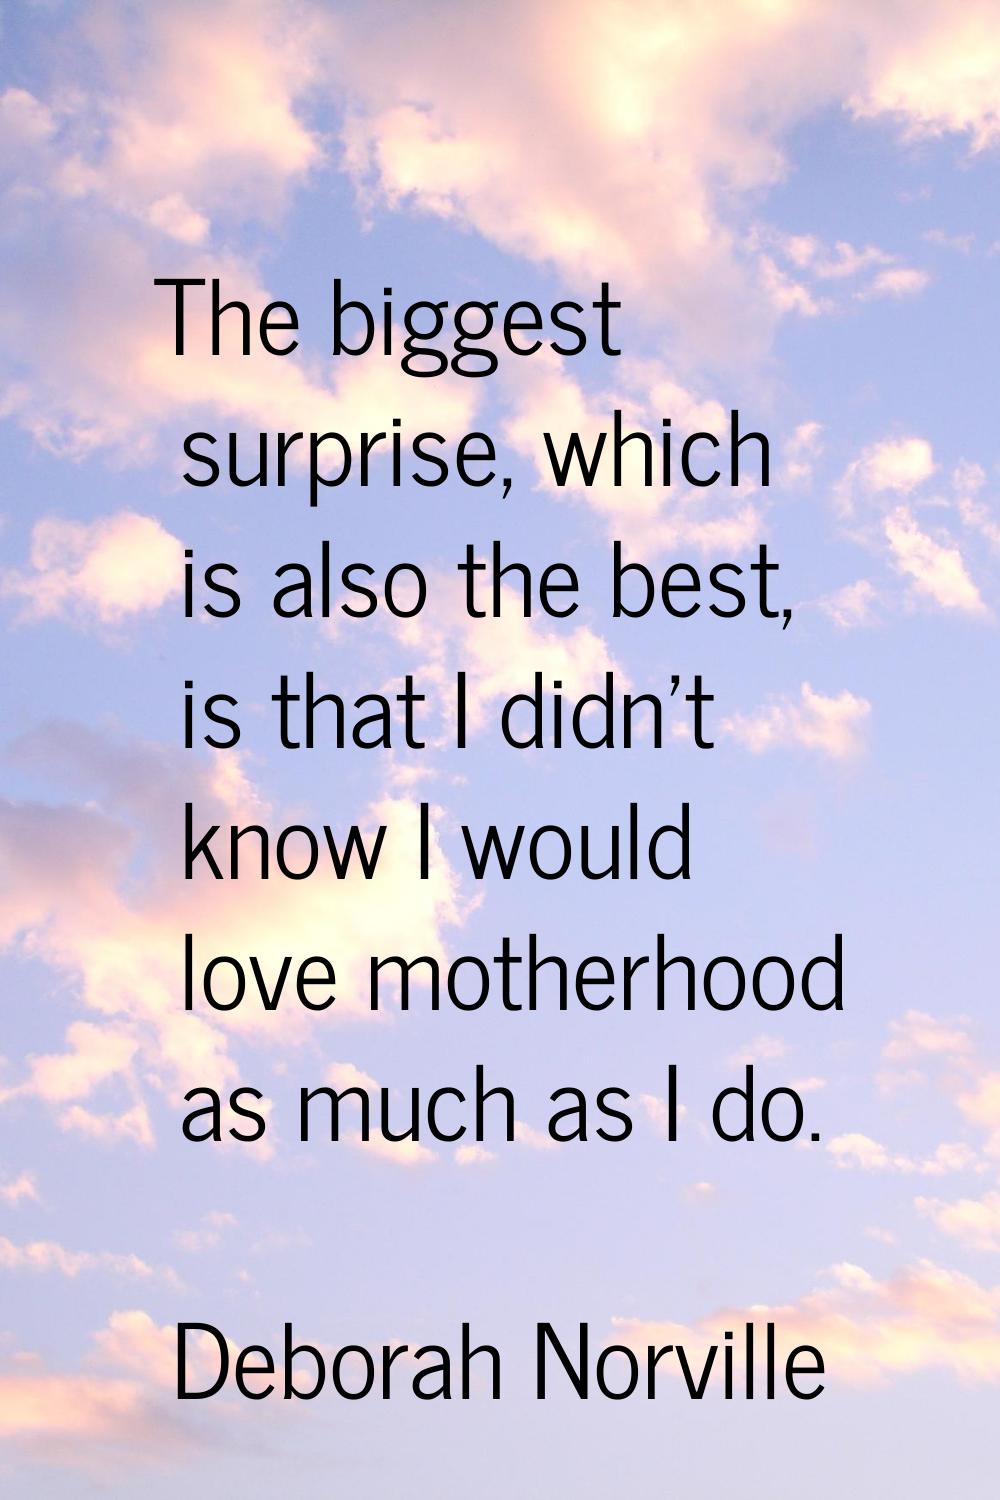 The biggest surprise, which is also the best, is that I didn't know I would love motherhood as much